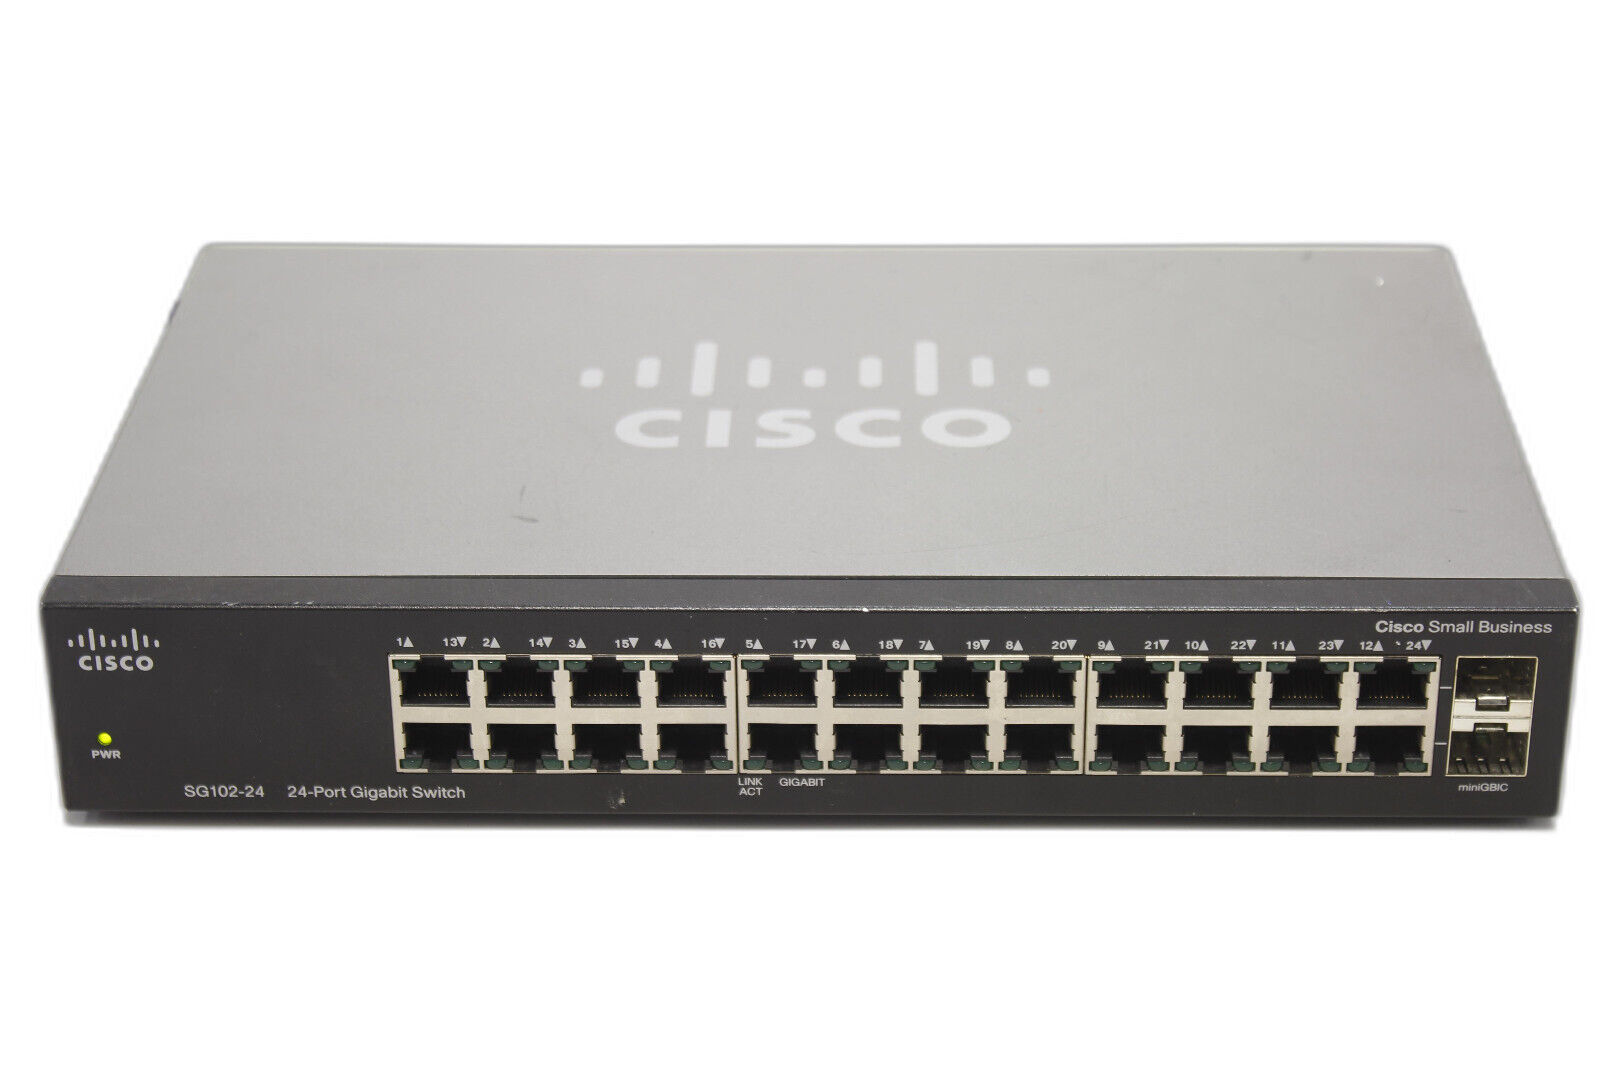 Cisco SG102-24 24-Ports Gigabit Compact Ethernet Network Switch with Power Cord